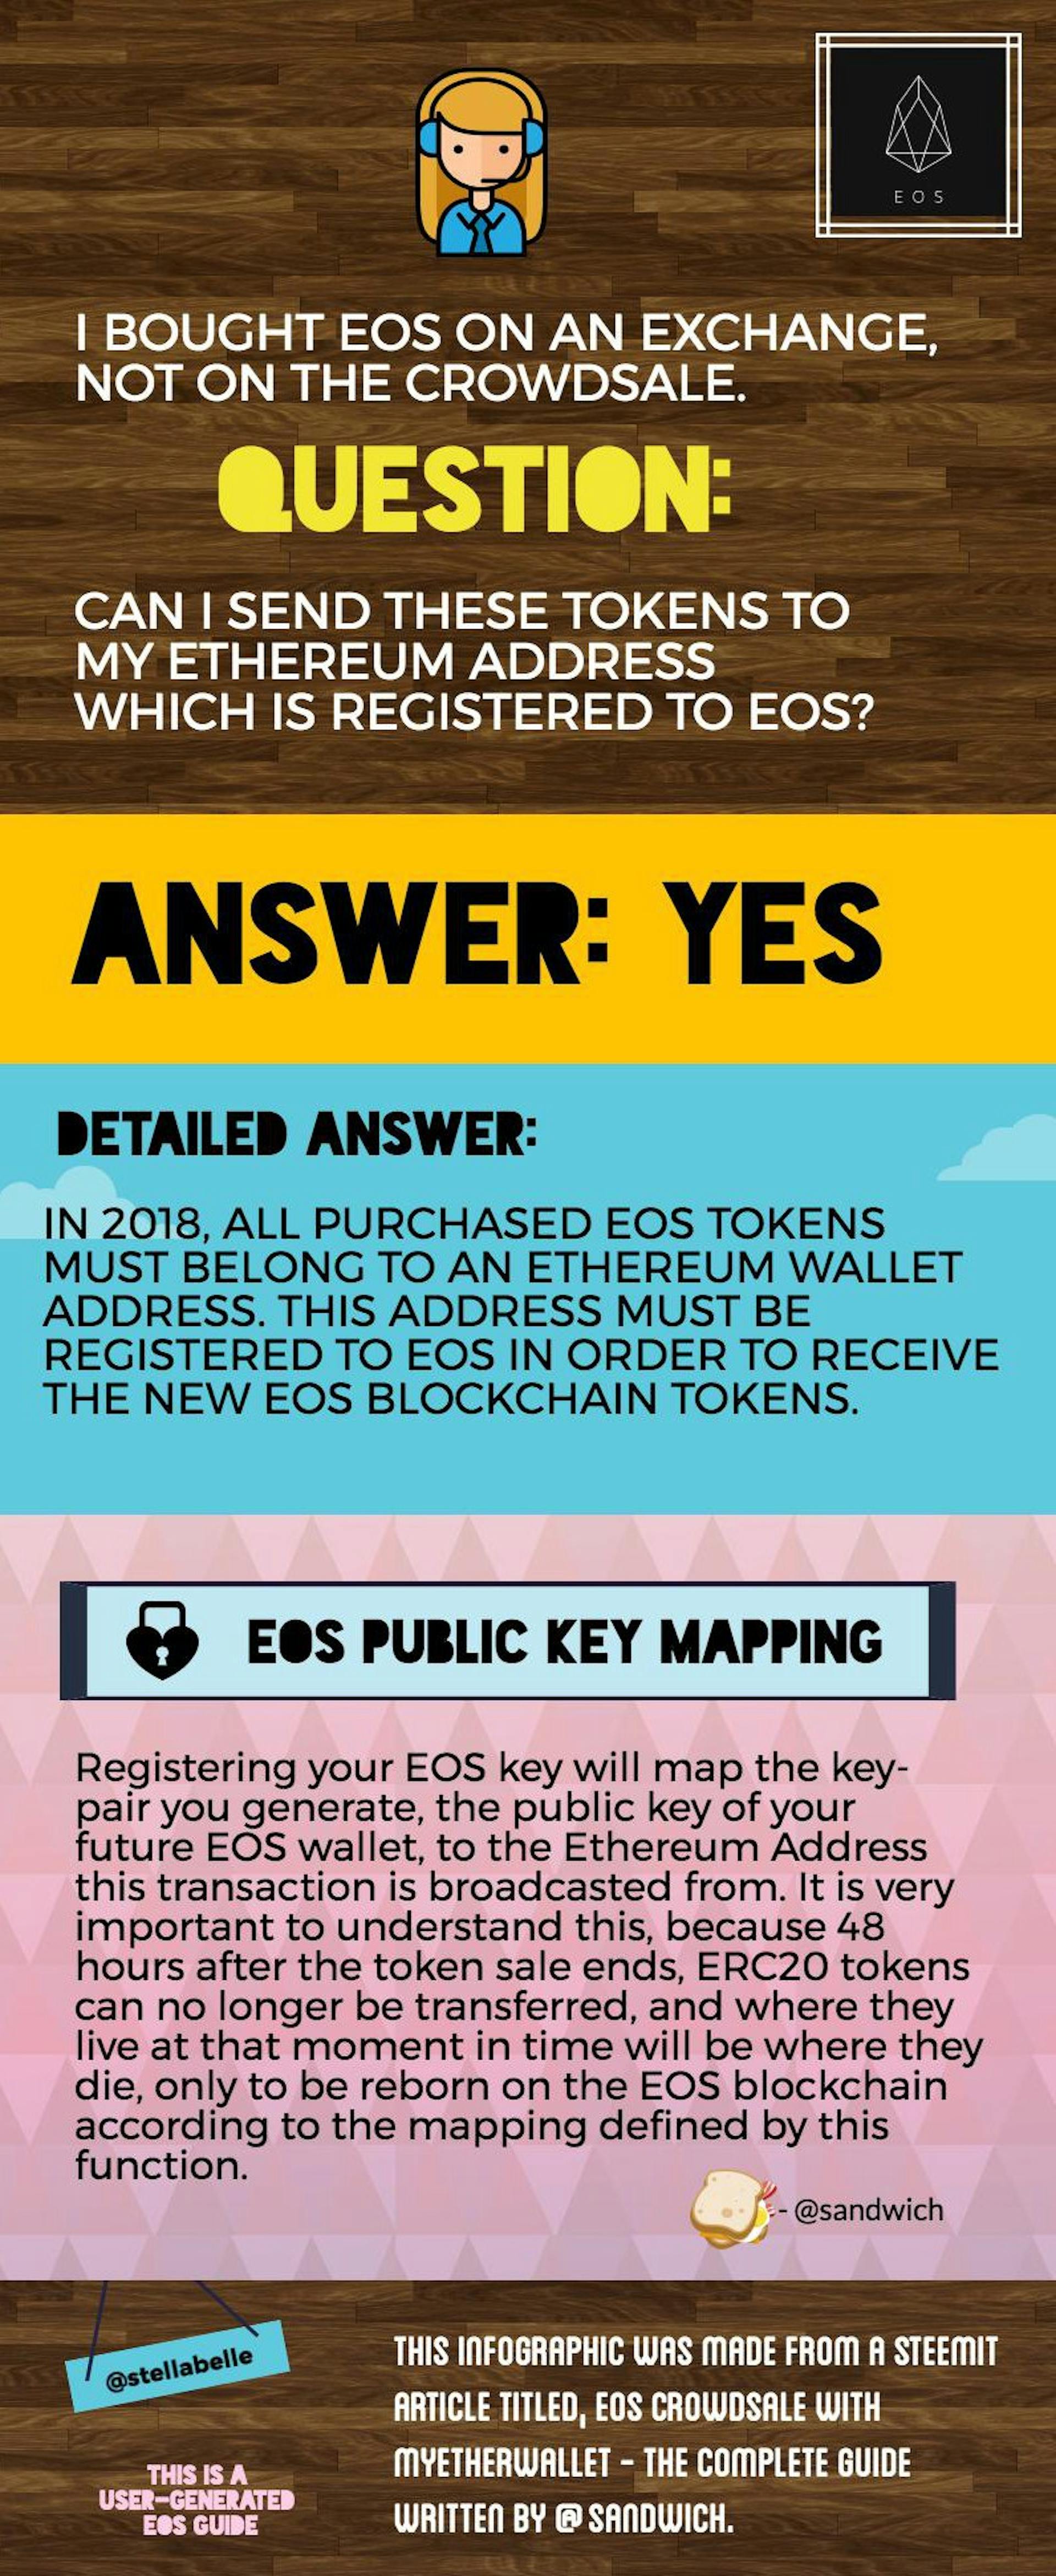 featured image - Can I Send My EOS I Bought on an Exchange To My Ethereum Address Which is Registered To EOS?